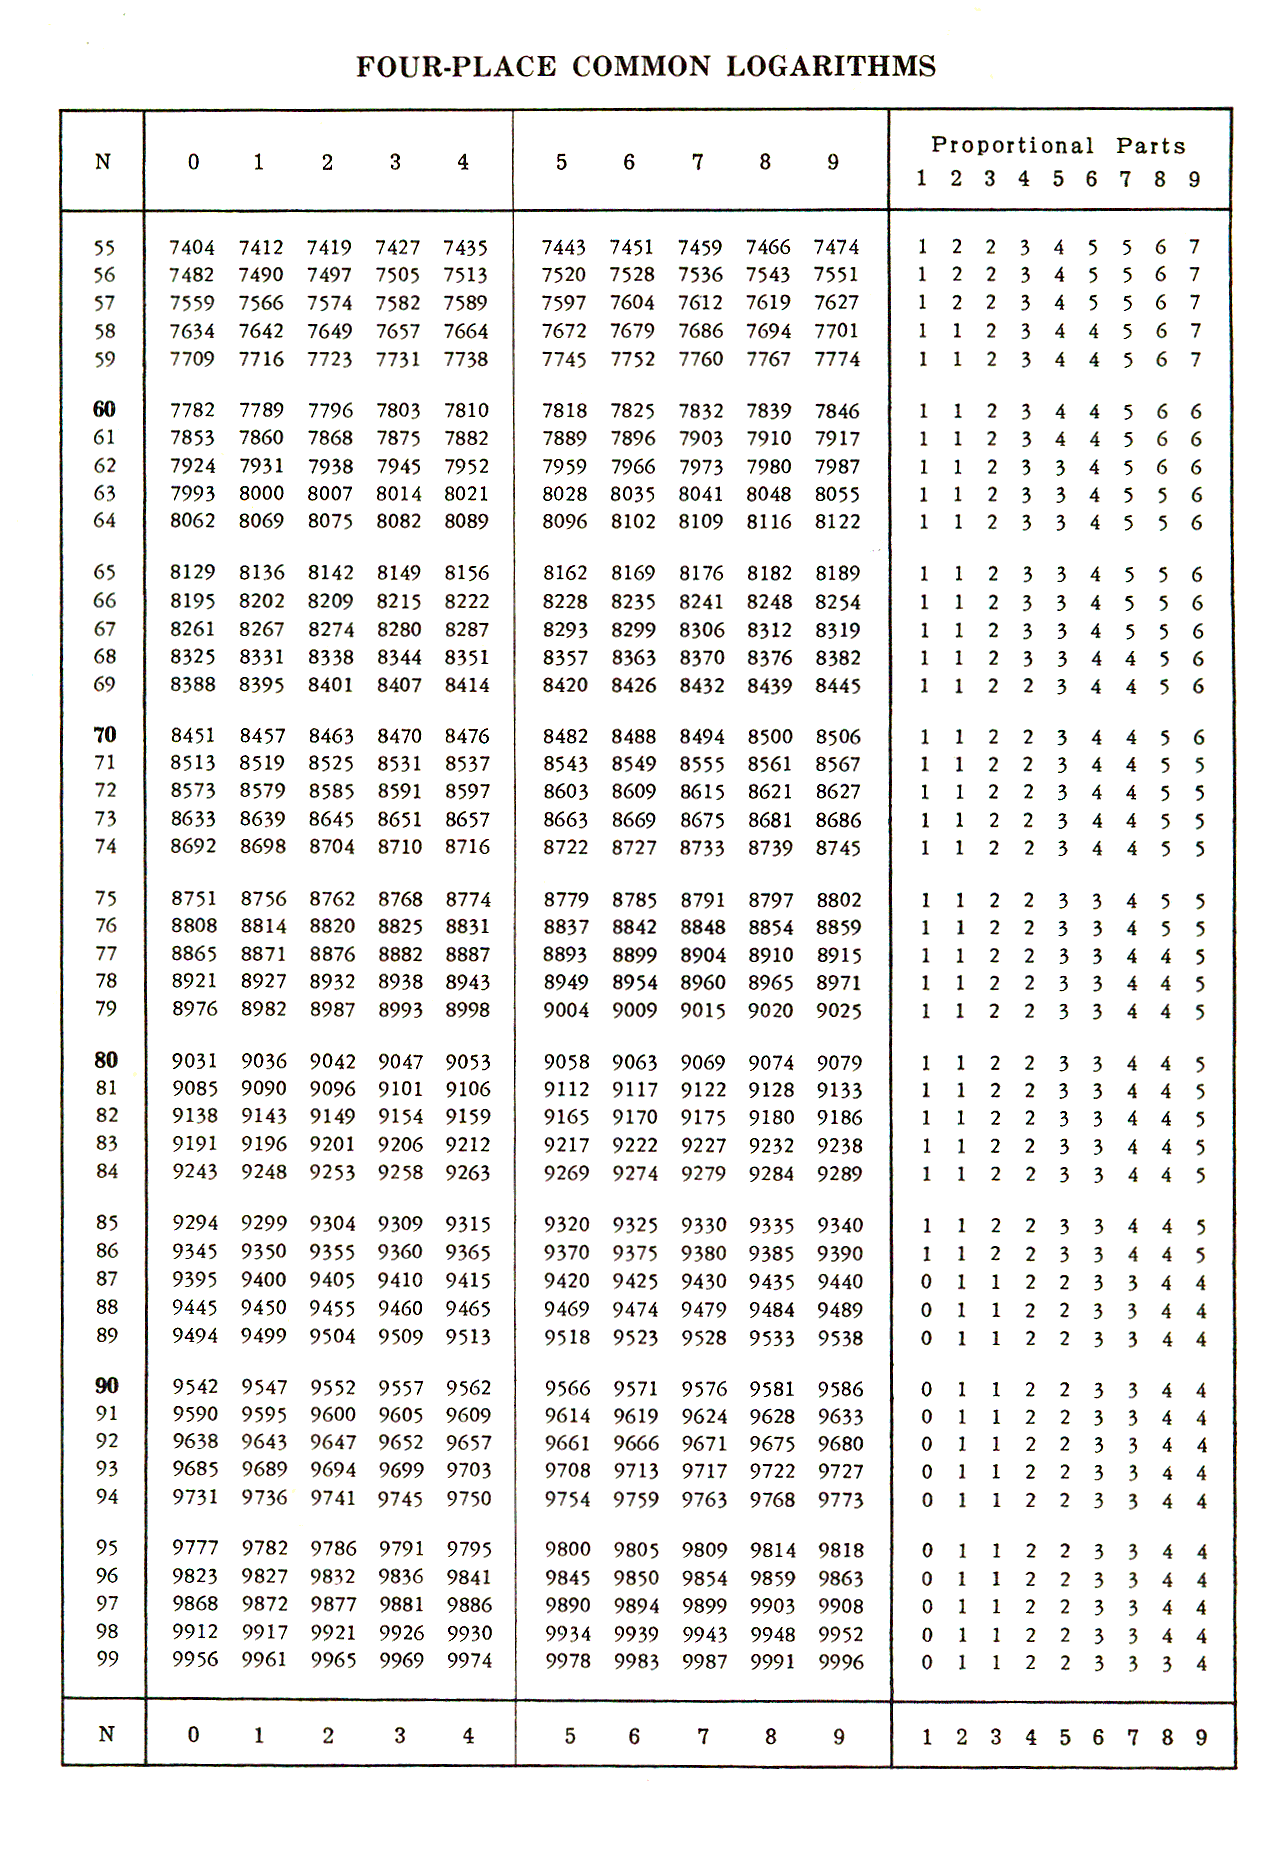 Second page of four-figure log tables